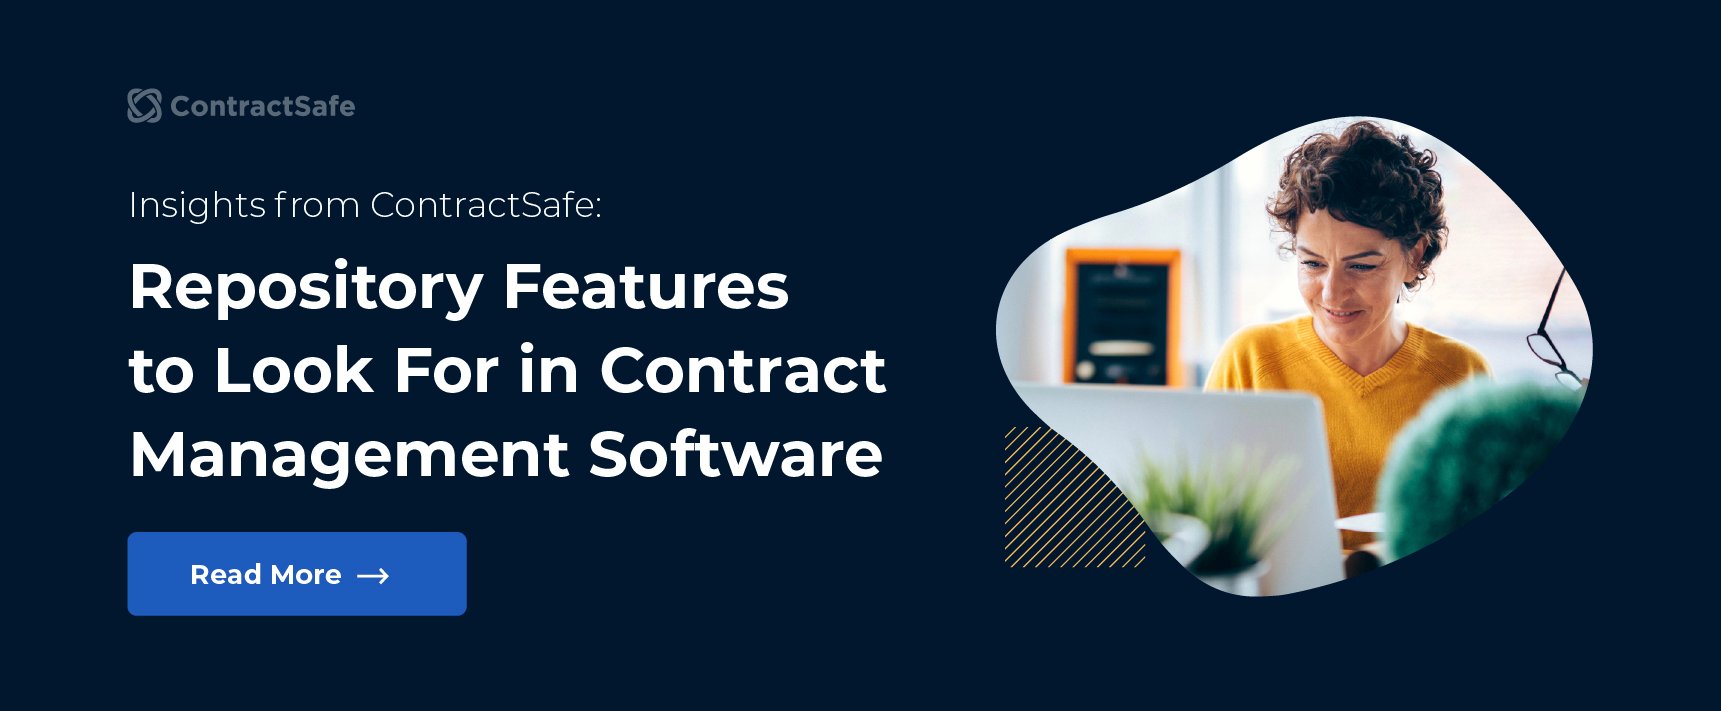 Insights from ContractSafe: Repository Features to Look For in Contract Management Software 